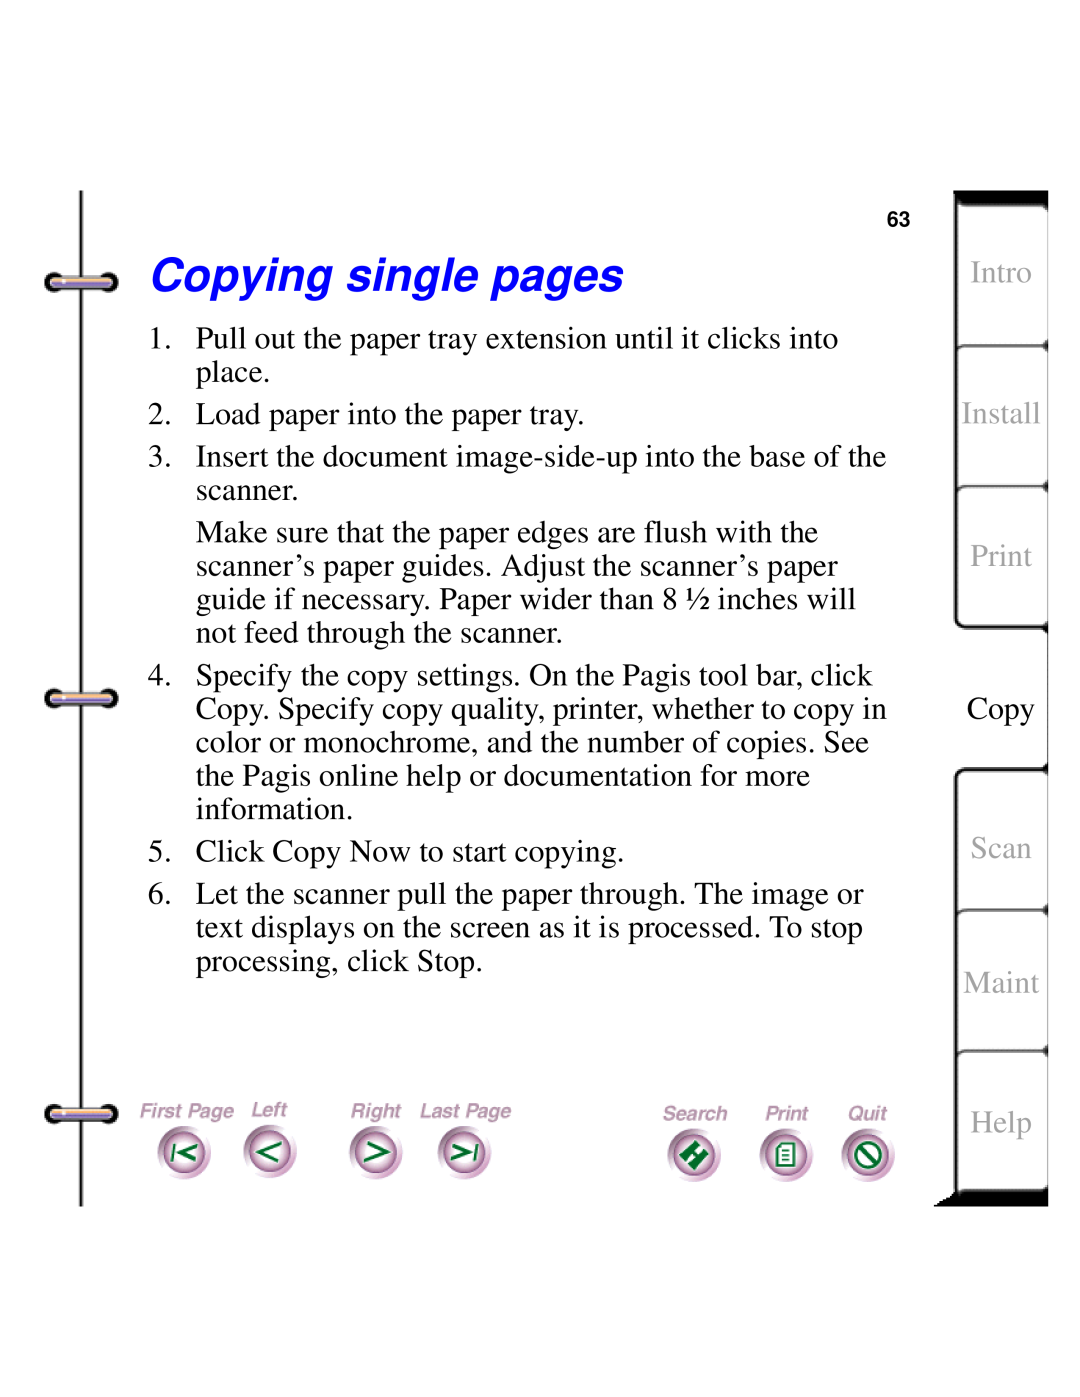 Xerox Document HomeCentre manual Copying single pages, Intro, Install Print, Scan Maint, Help 